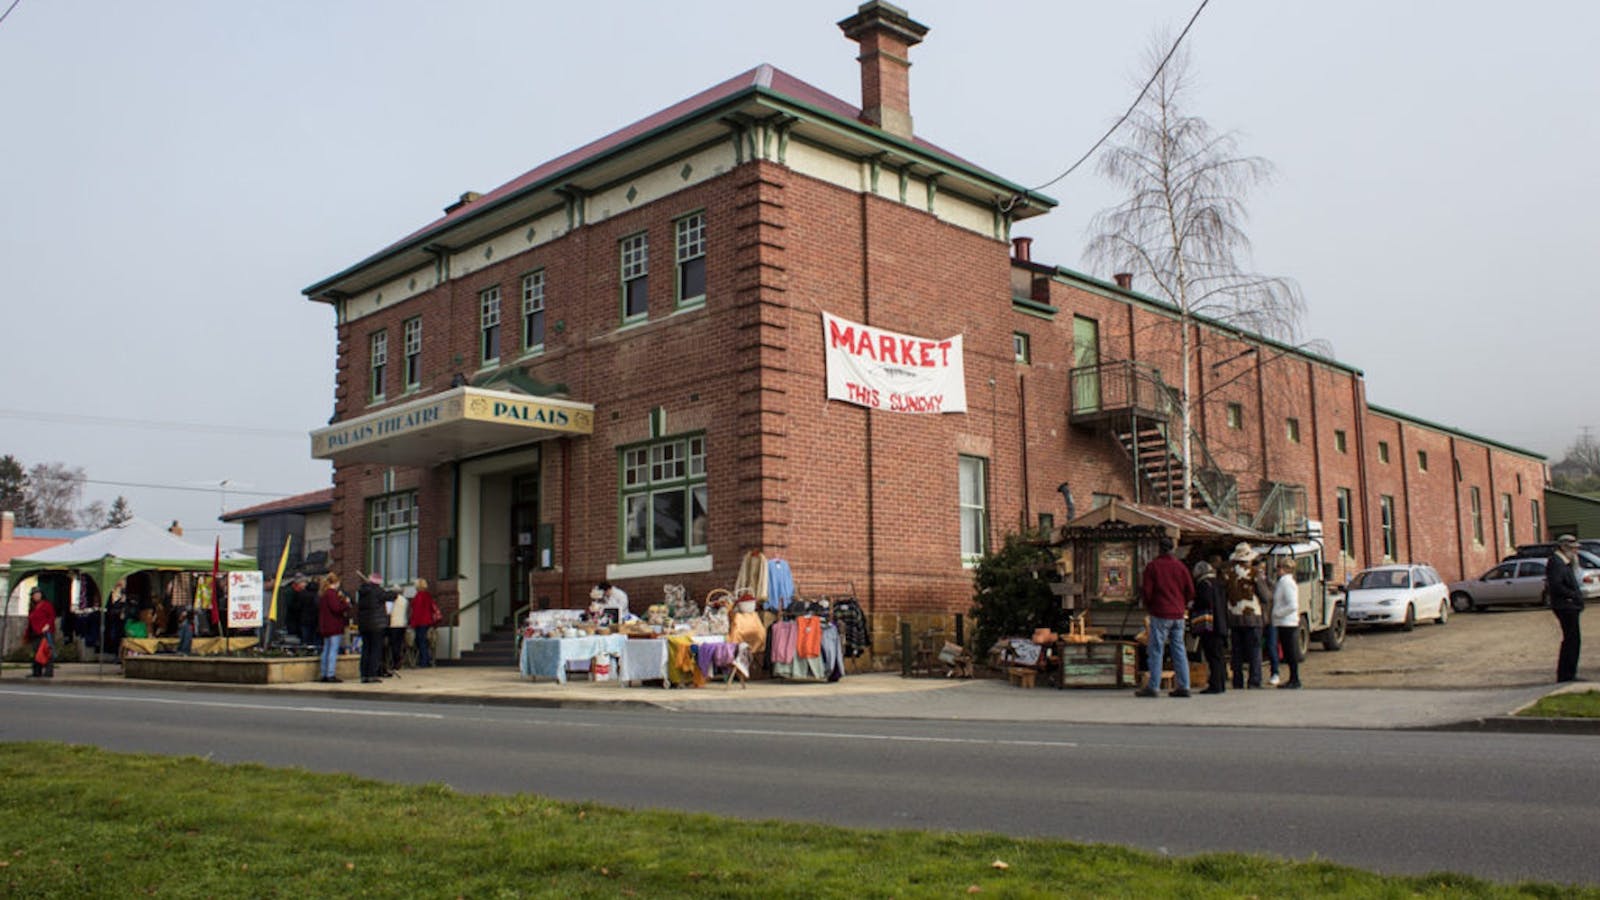 Monthly Market at the Franklin Palais is on the last Sunday of the Month 10am to 2pm